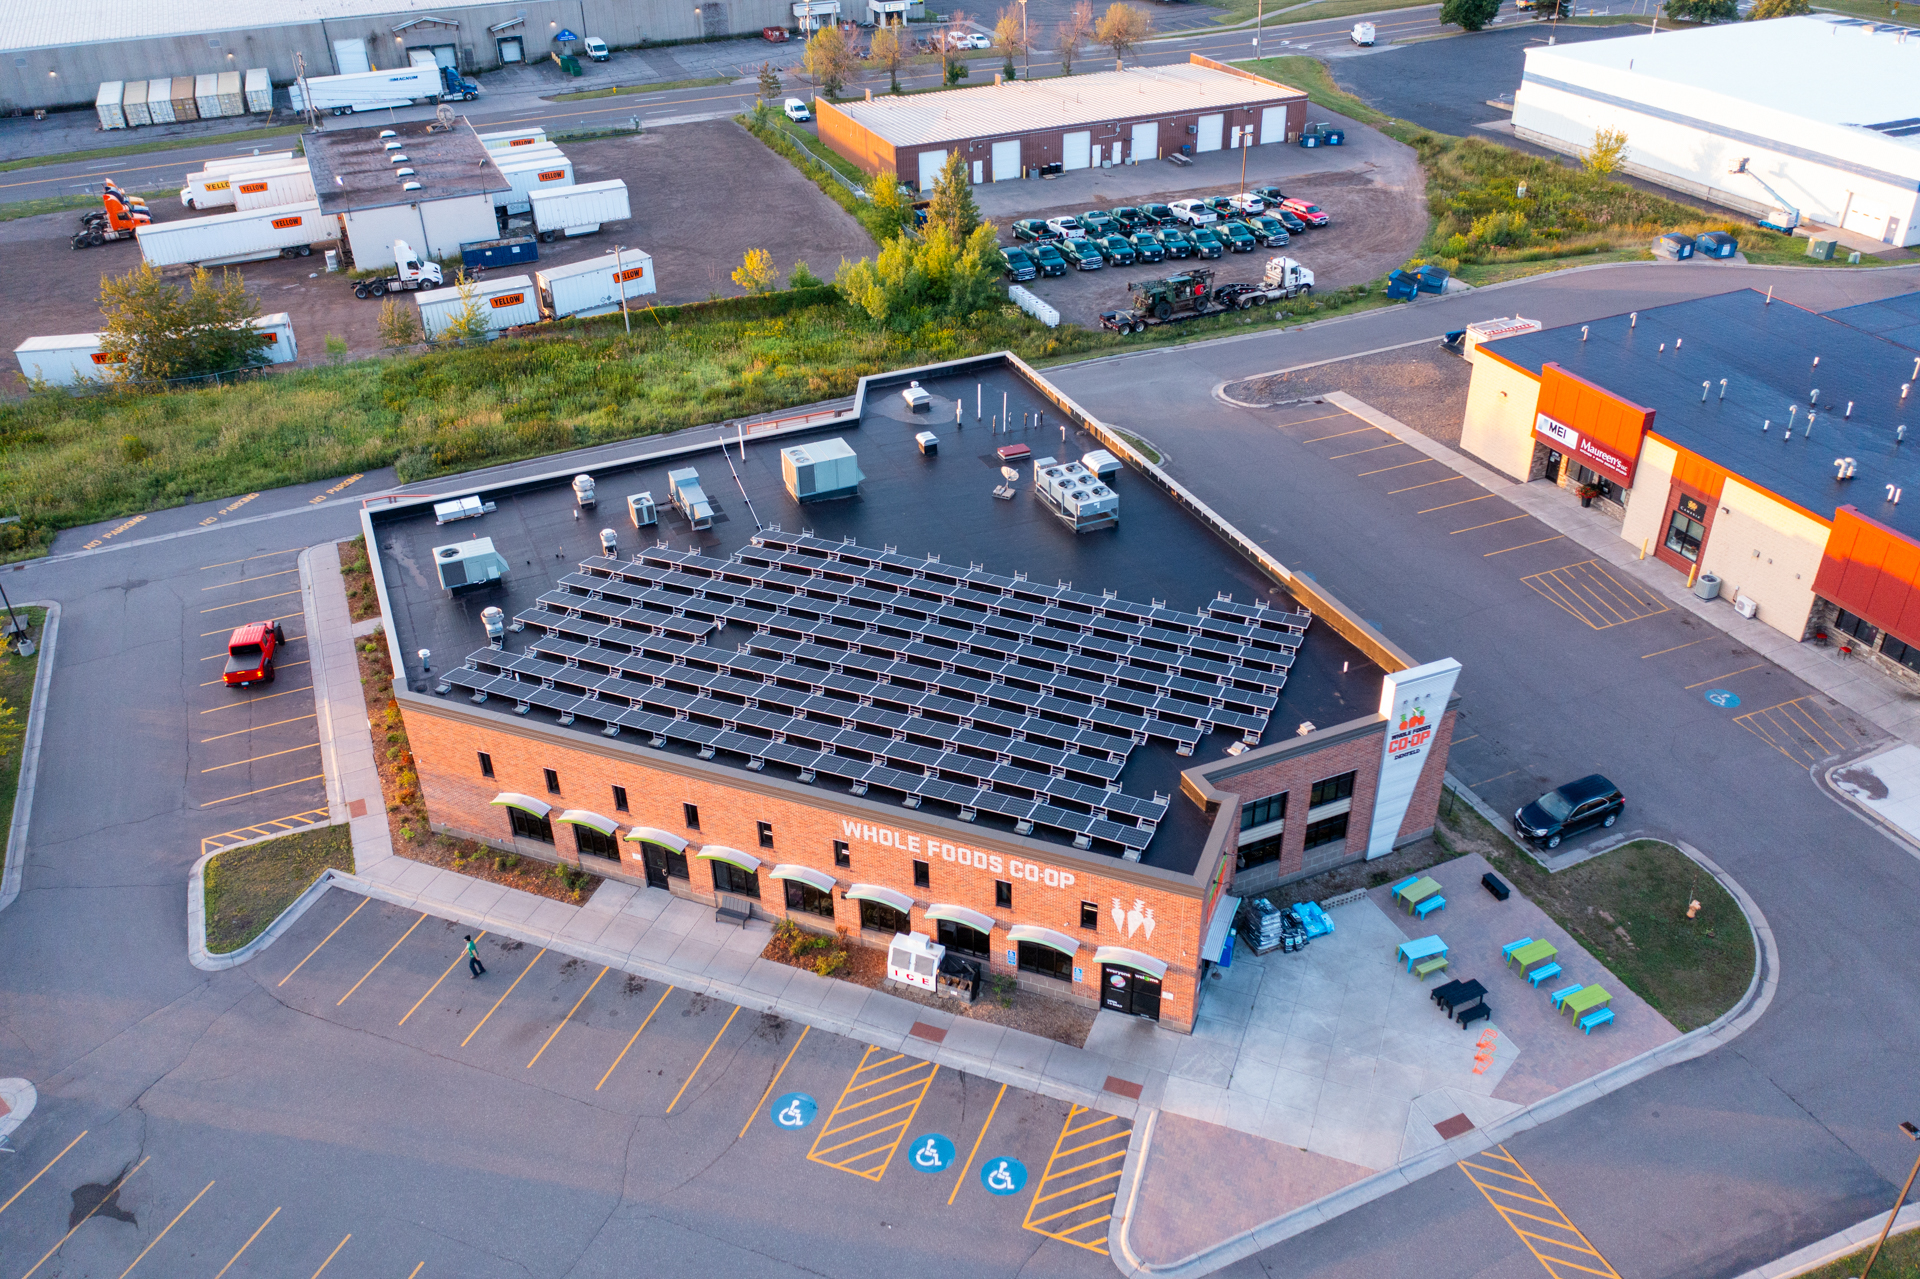 Aerial view the Whole Foods Co-op Denfeld store. An array of solar panels can be seen on the rooftop.